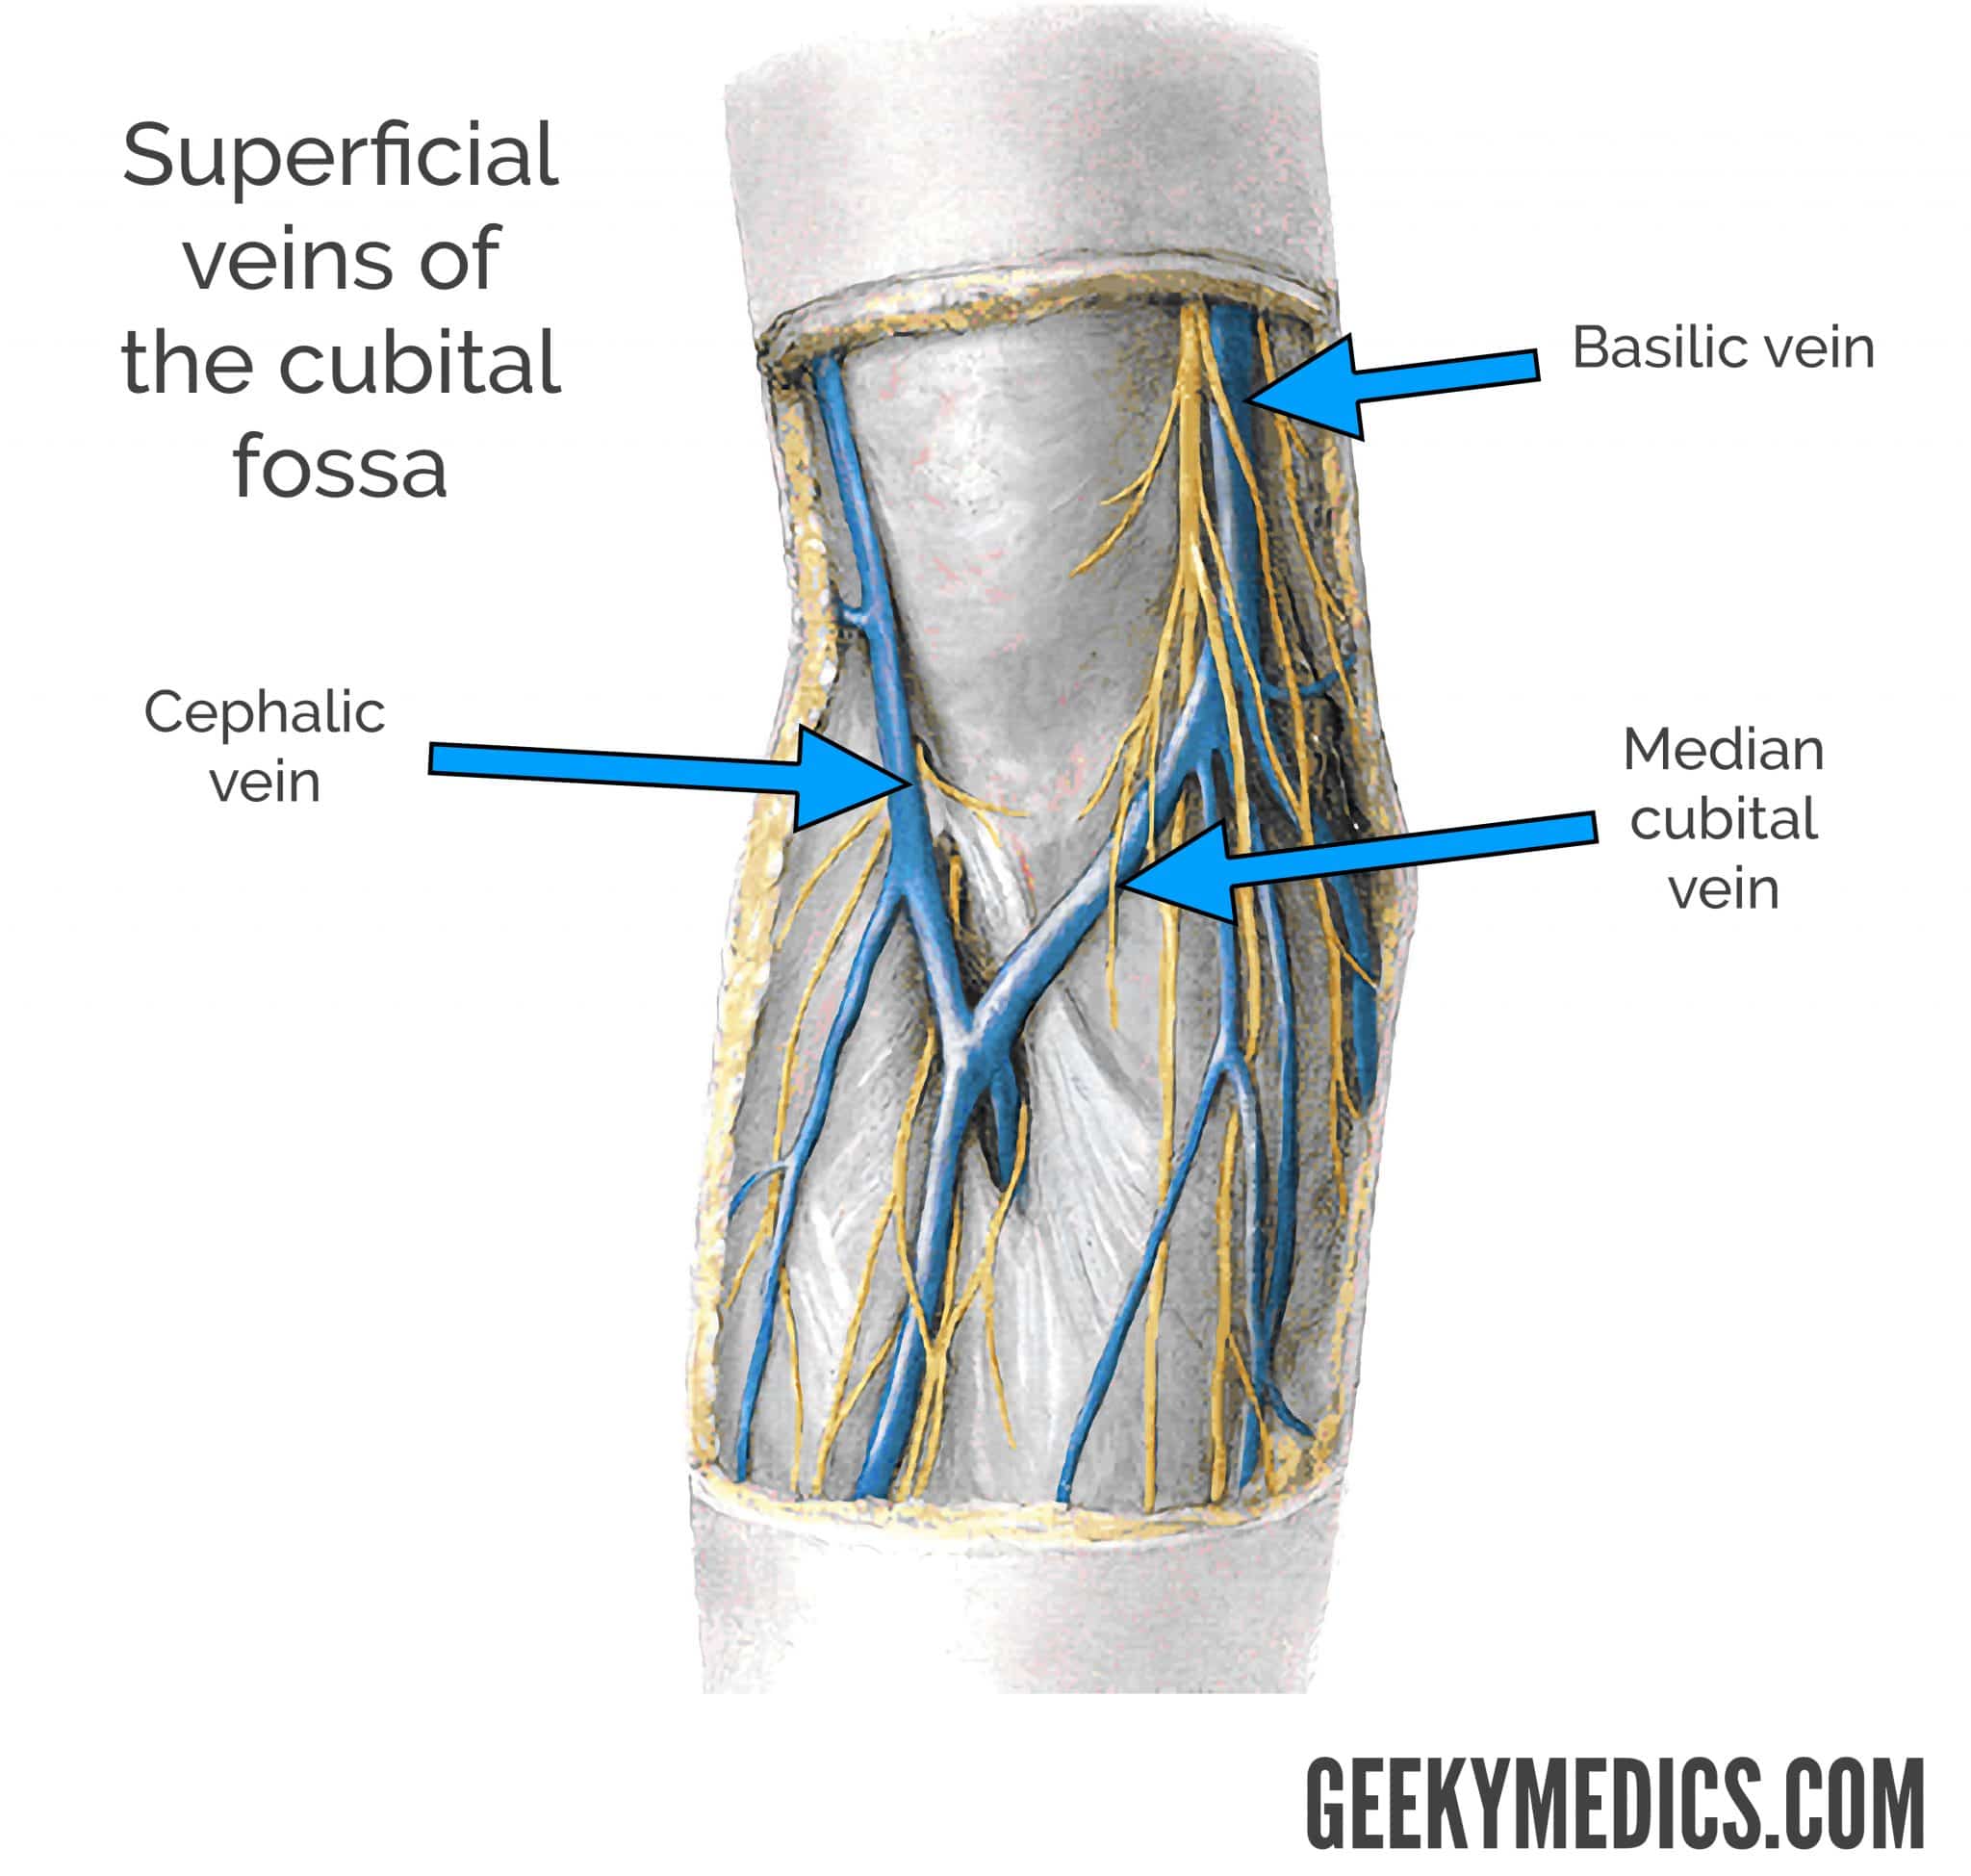 Table From Patterns Of Superficial Veins In The Cubital Fossa And Its ...